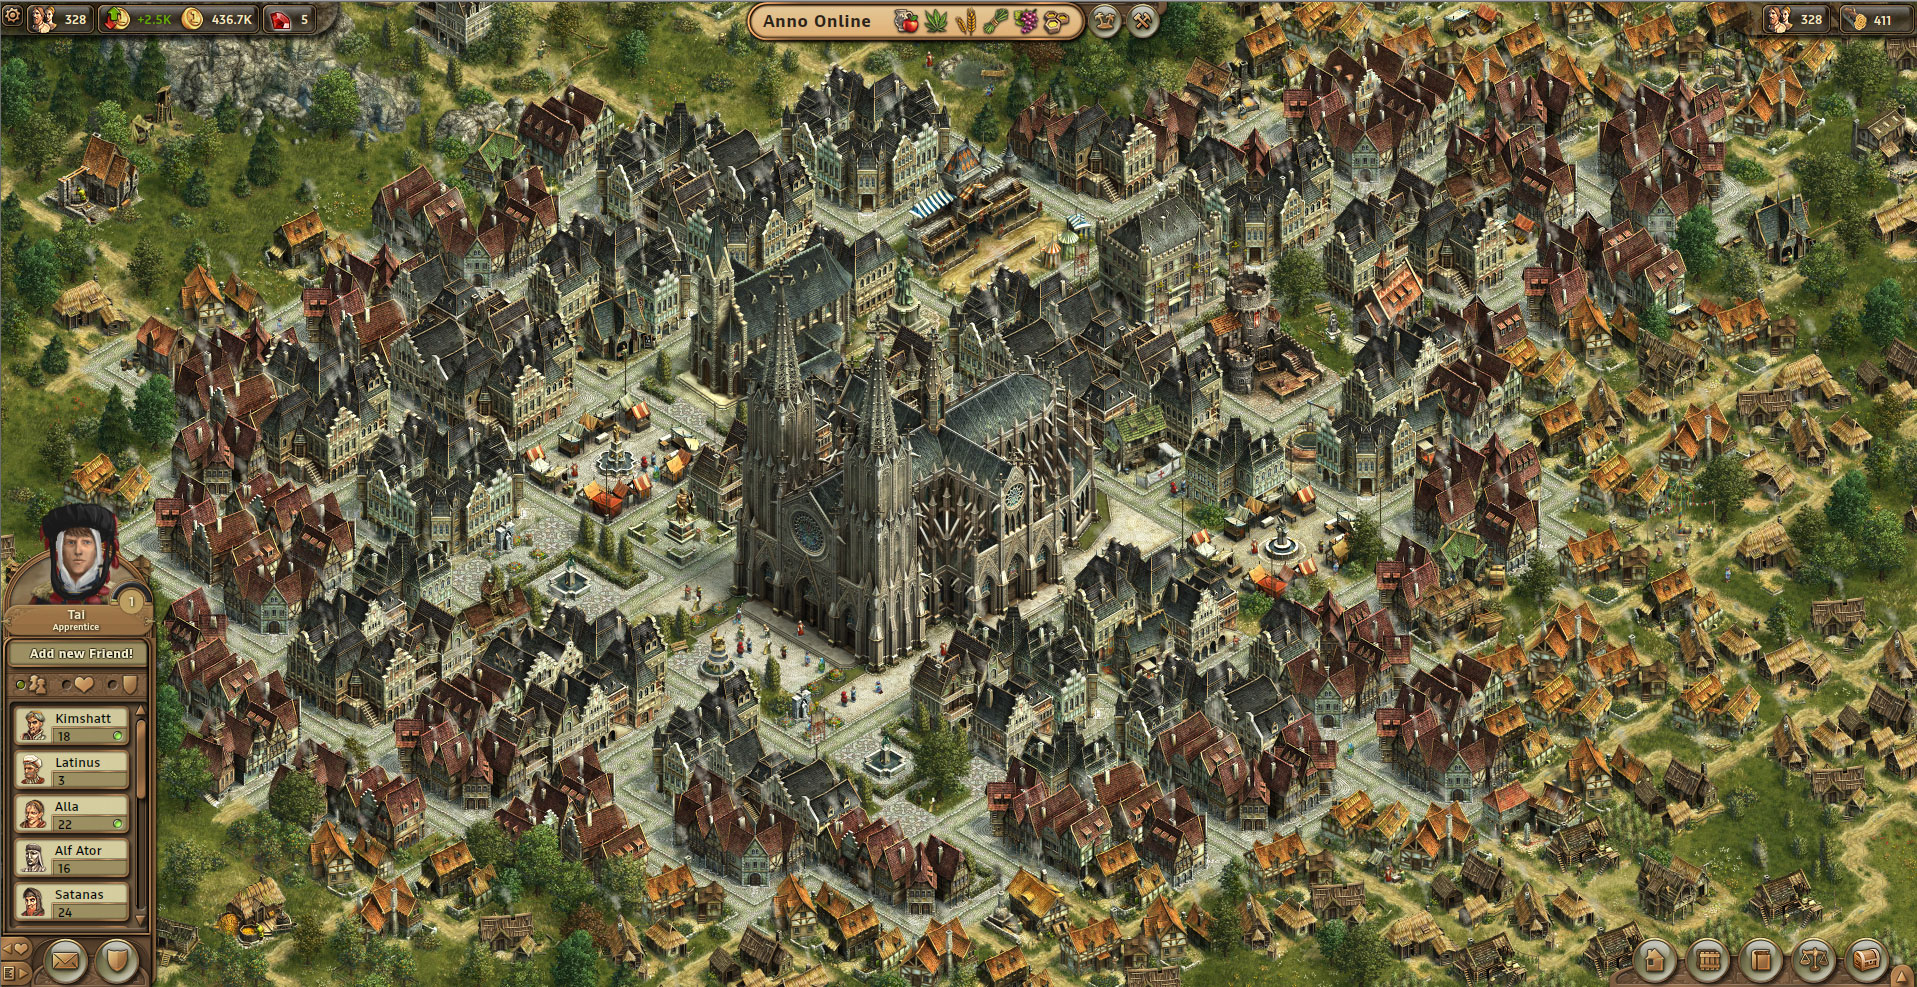 Anno, Anno Online, Stratrgy, City, City Building, Game, Cathedral, Online, Browser